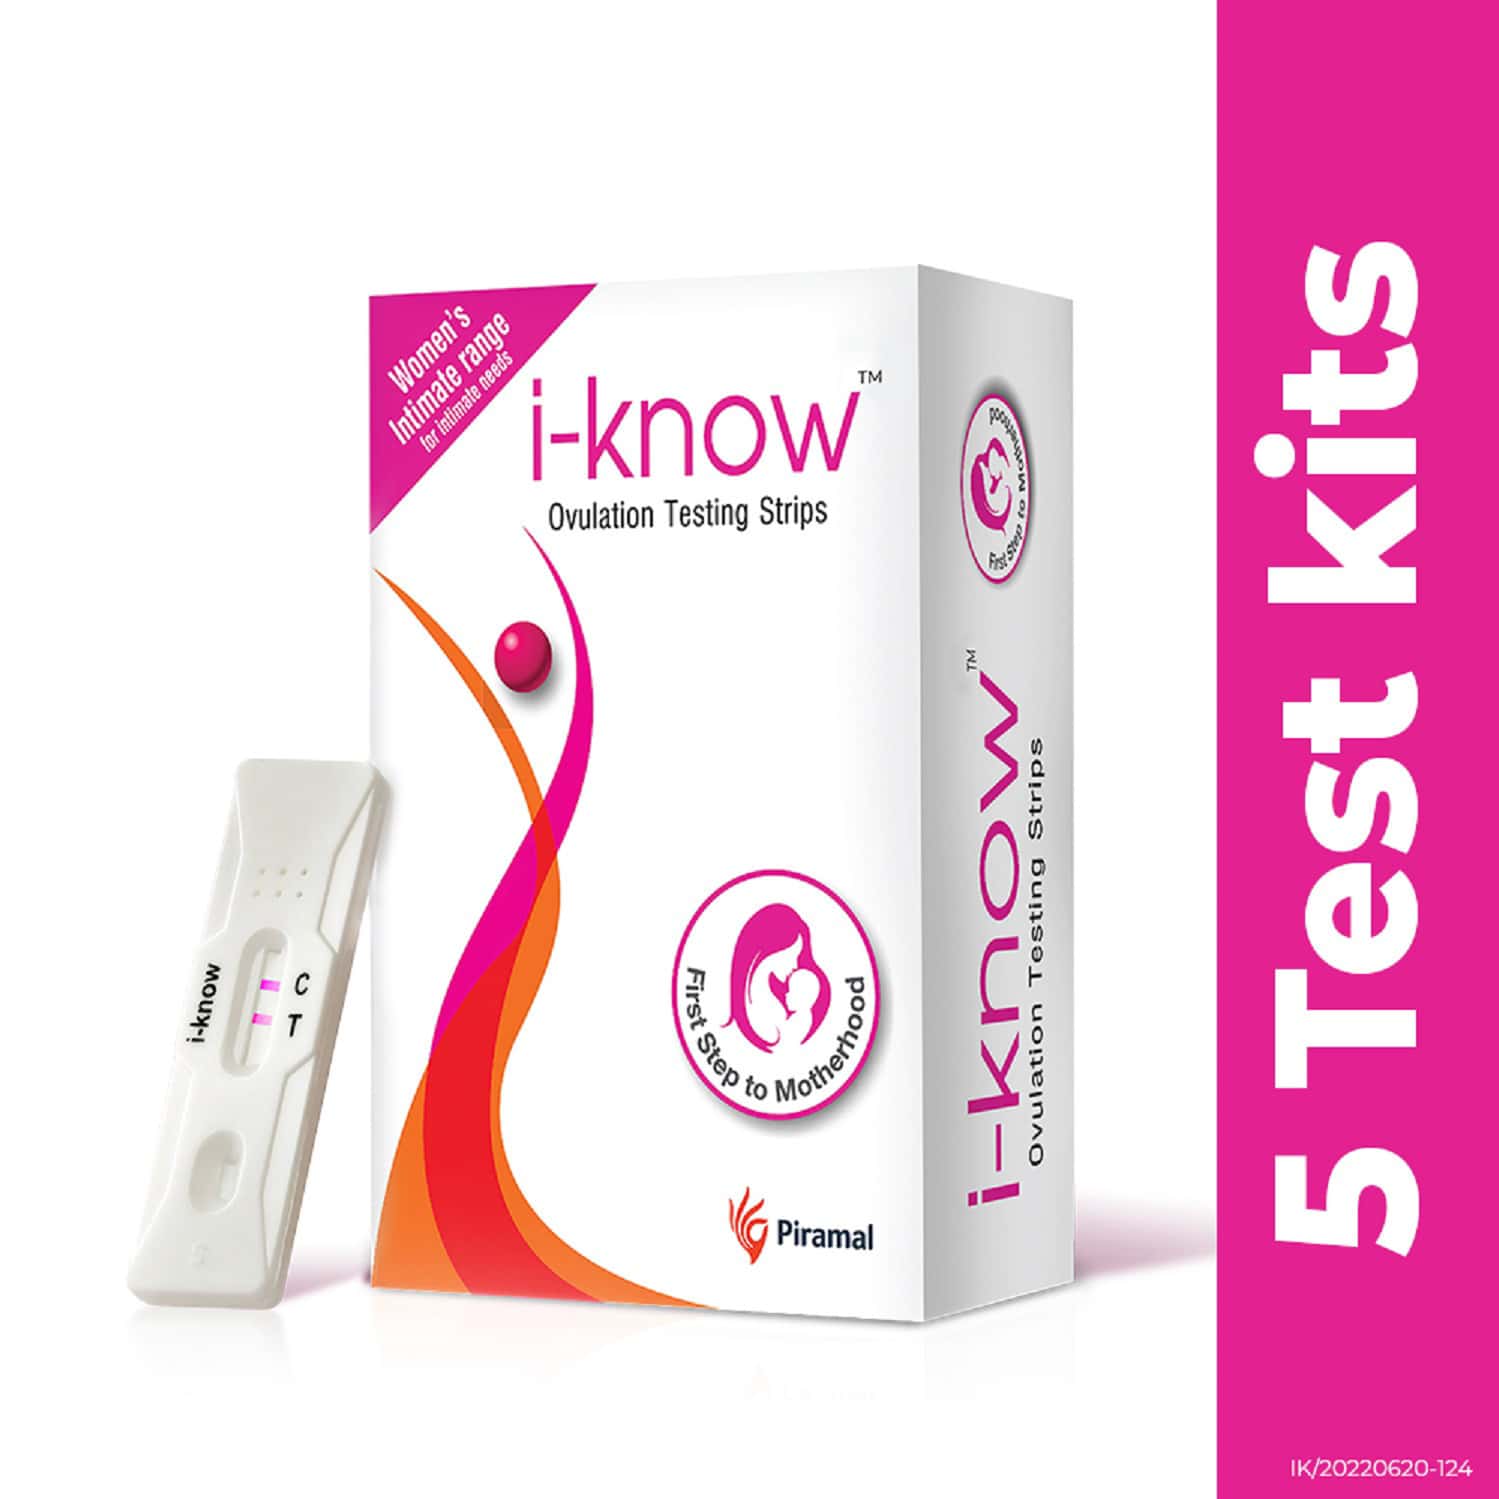 I-Know Ovulation Testing Strips | For Women Planning Pregnancy, 5 Strips